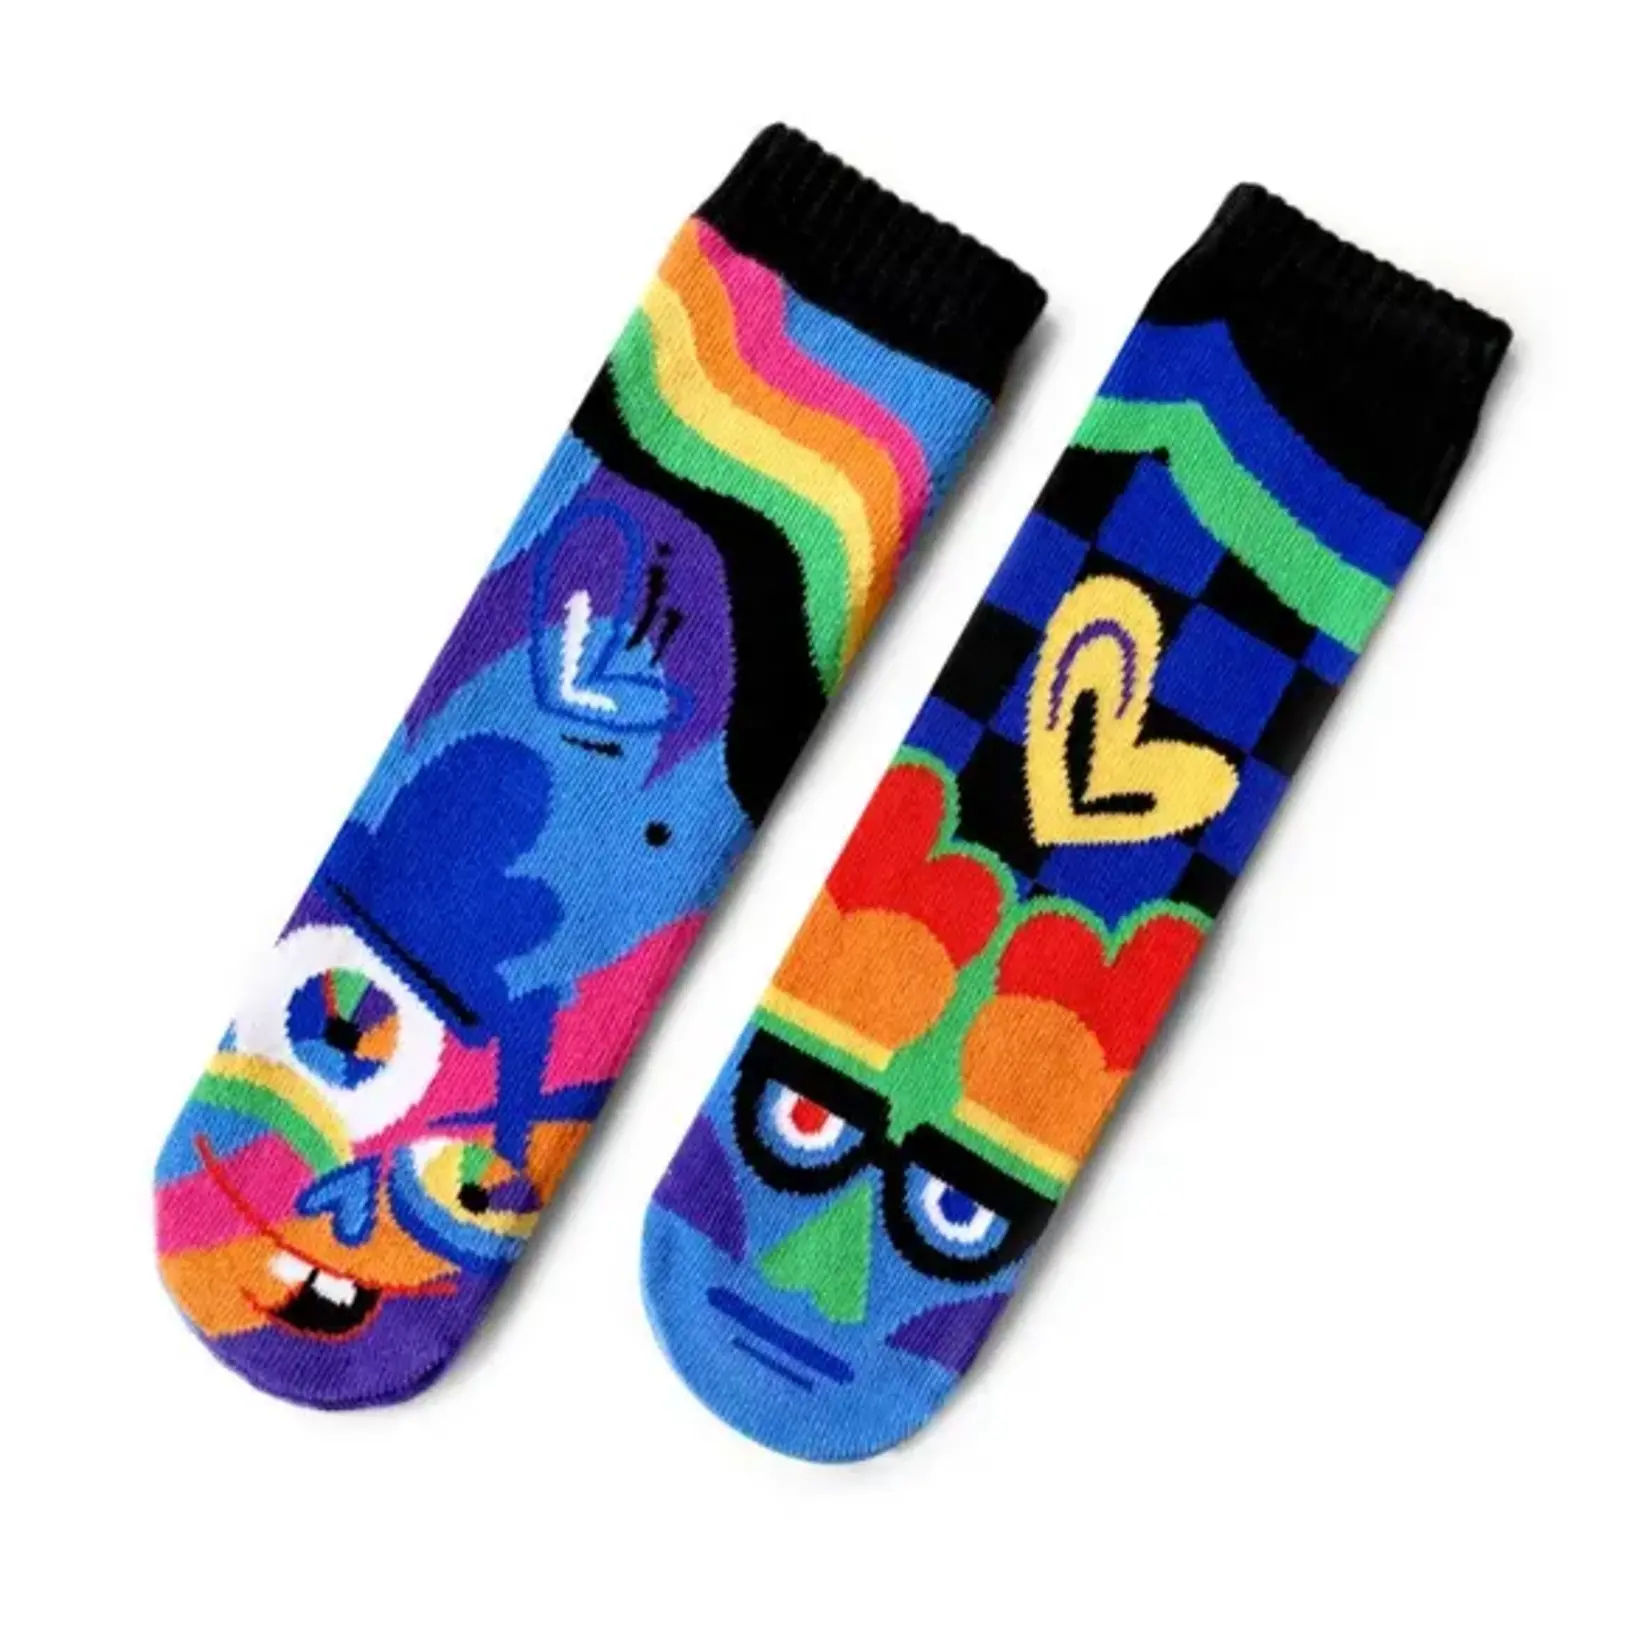 Pals Socks - Silly & Serious, Ages 1-3